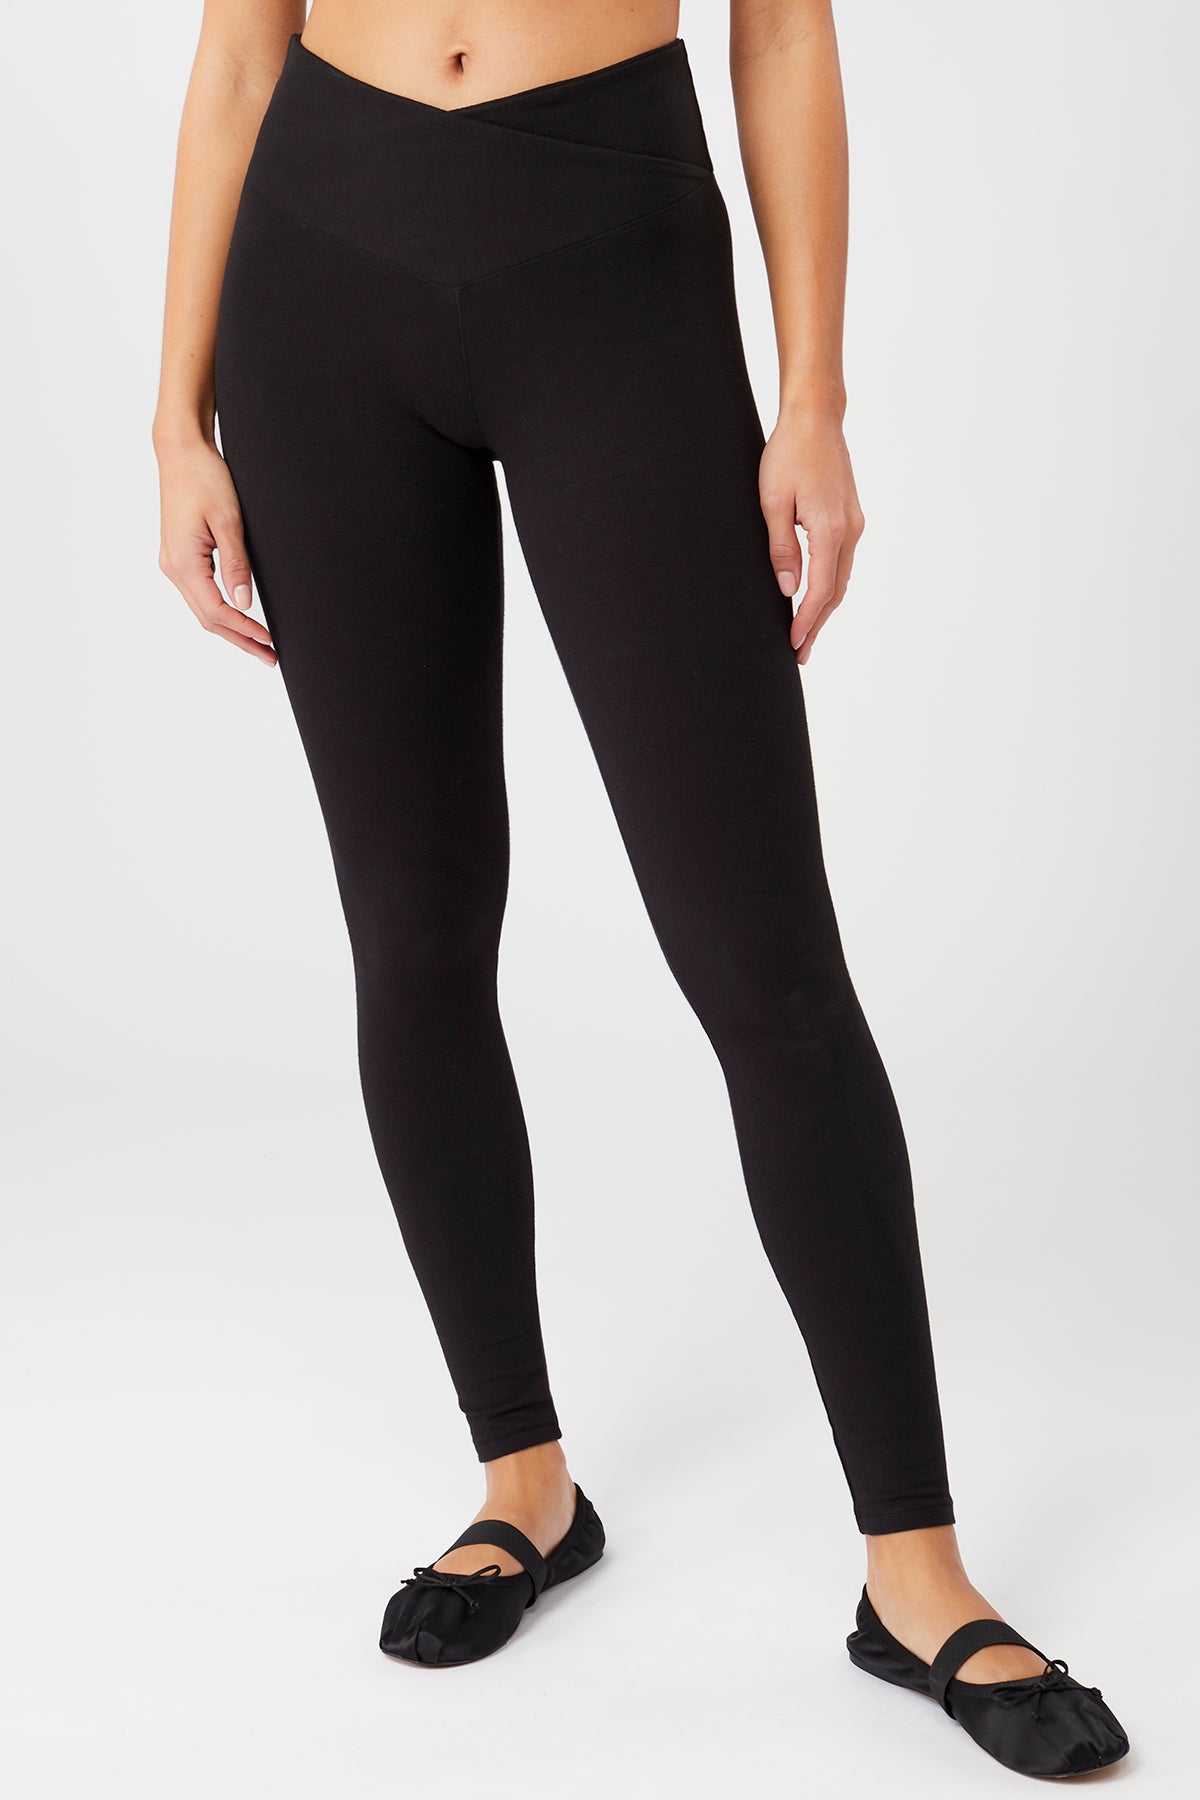 Leggings With Cross Front Waistband